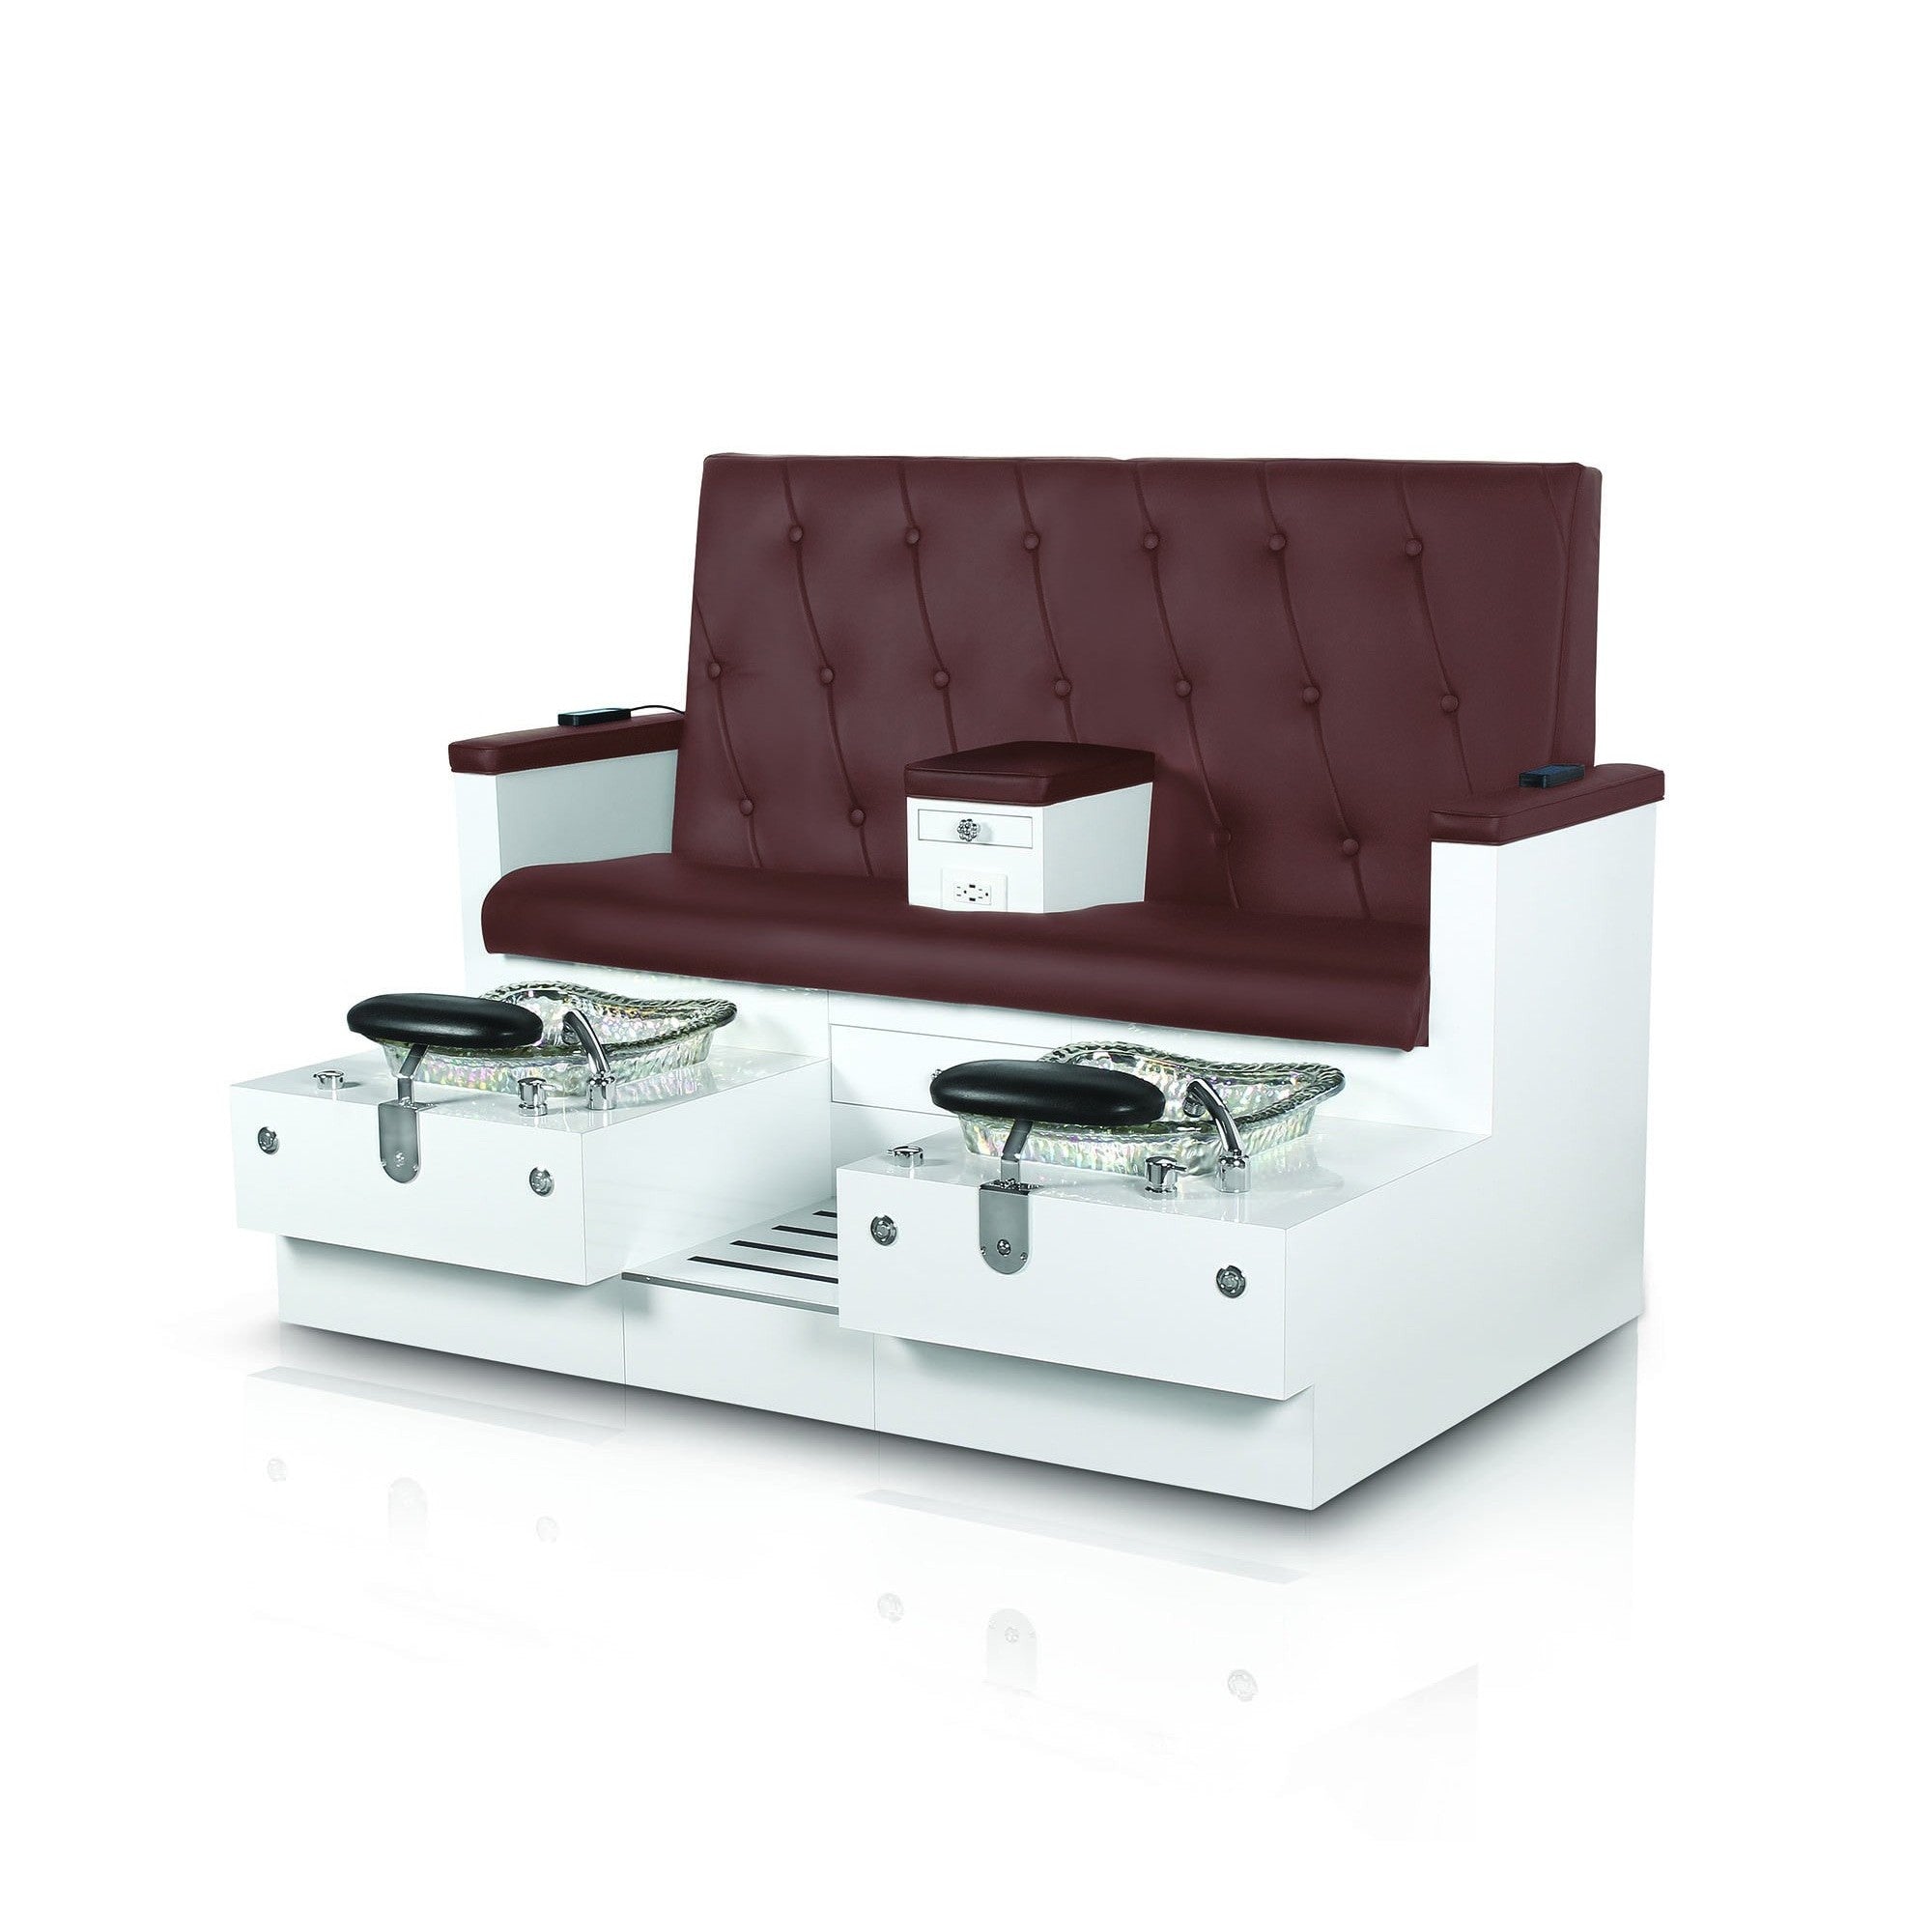 Gulfstream Gulfstream Vienna Double Pedicure Chair Bench Pedicure & Spa Chairs - ChairsThatGive